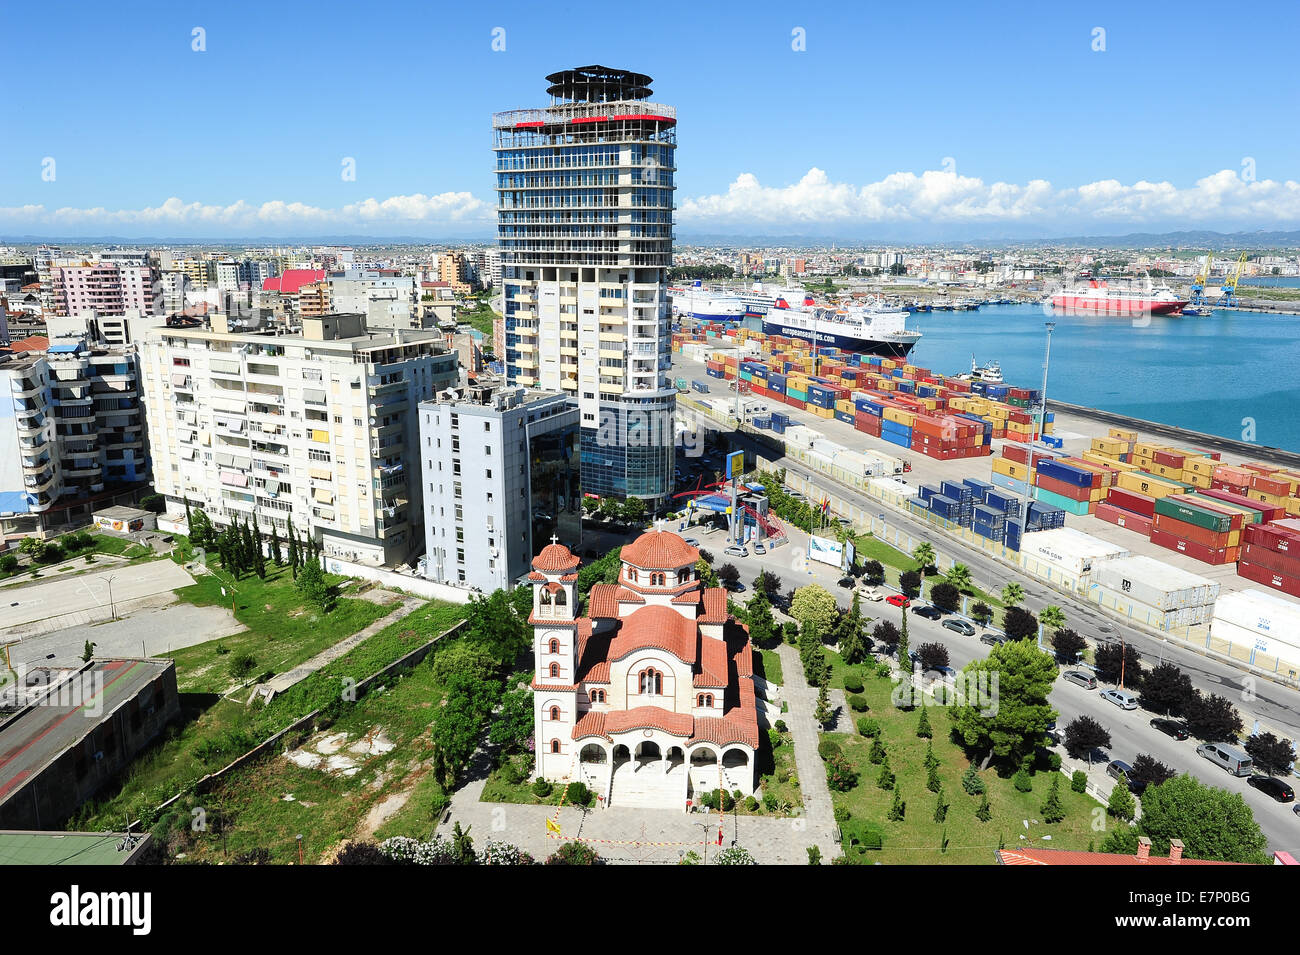 Albania, boat, building, business, cargo, carrier, church, coast, colour, colourful, commerce, commercial, container, crane, day Stock Photo